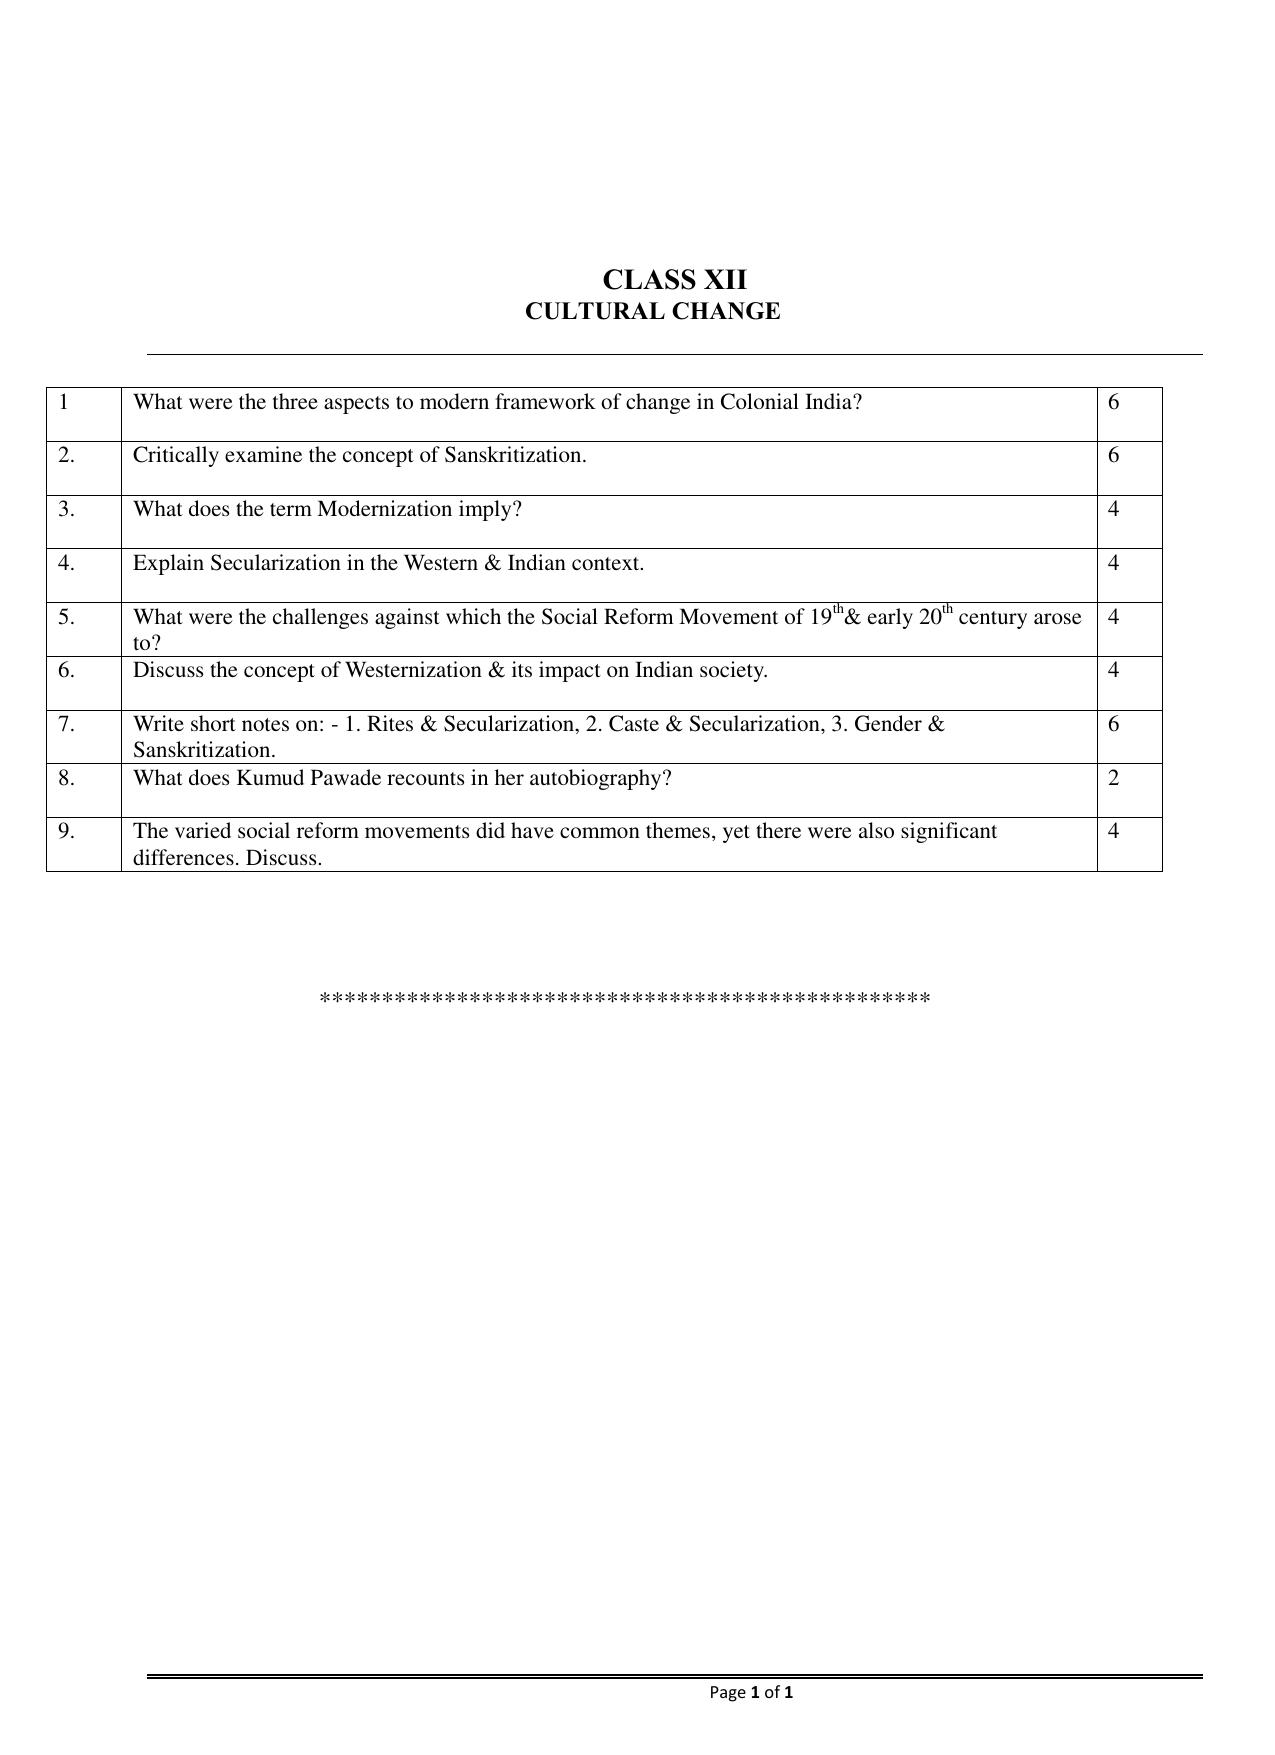 CBSE Class 12 Sociology Cultural Change Worksheets - Page 1